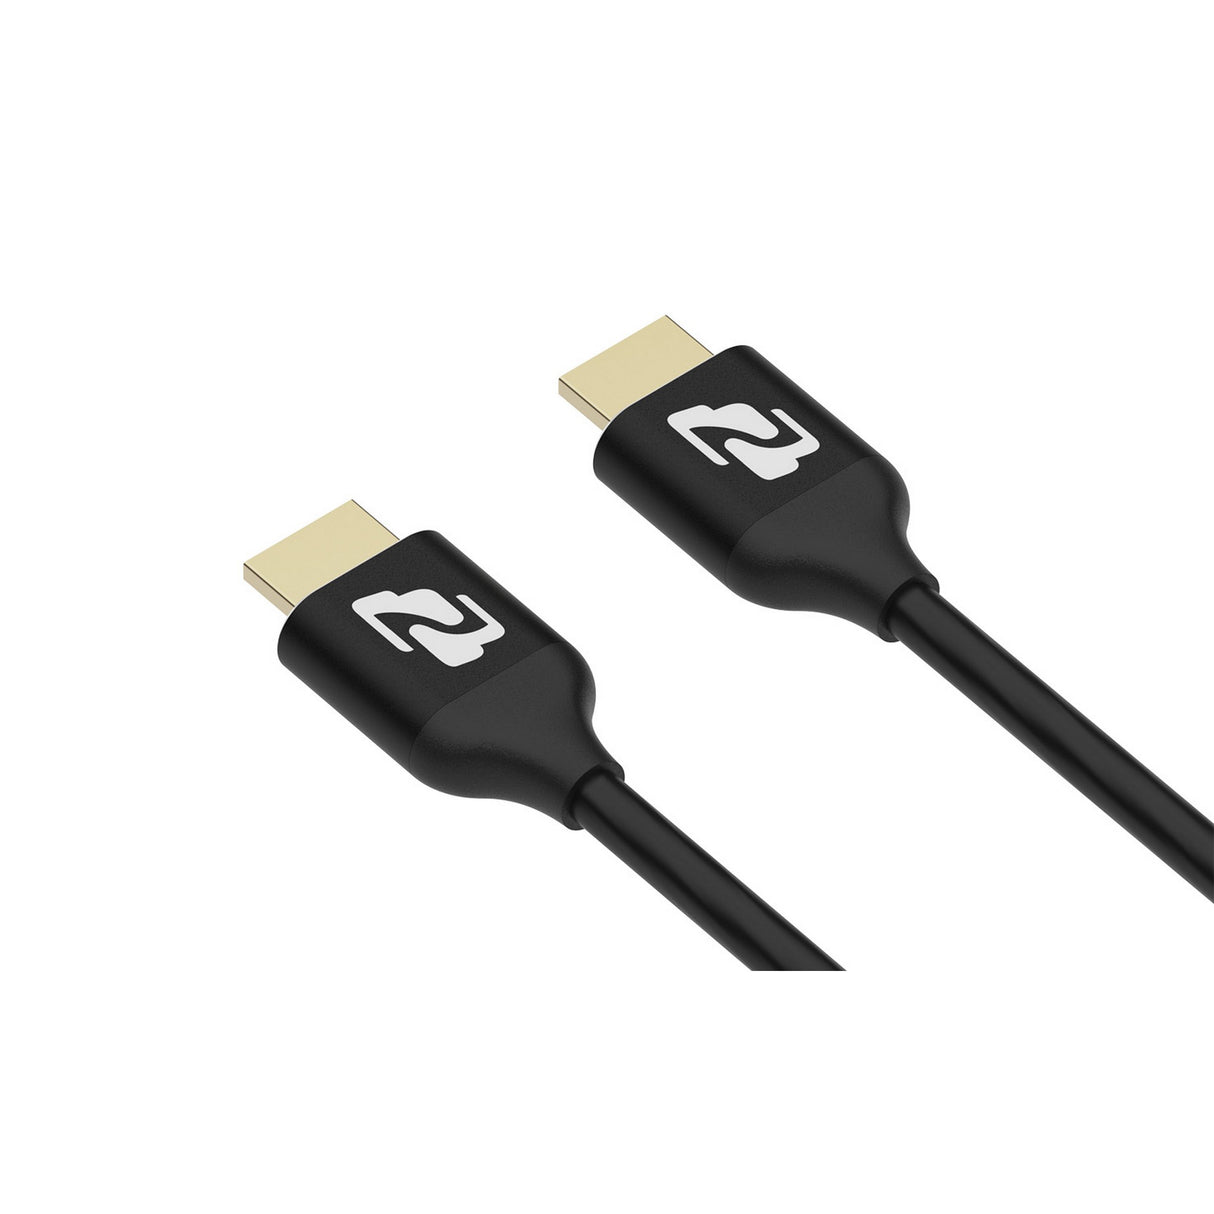 BZBGEAR 8K UHD HDMI 2.1 Certified 48Gbps Cable